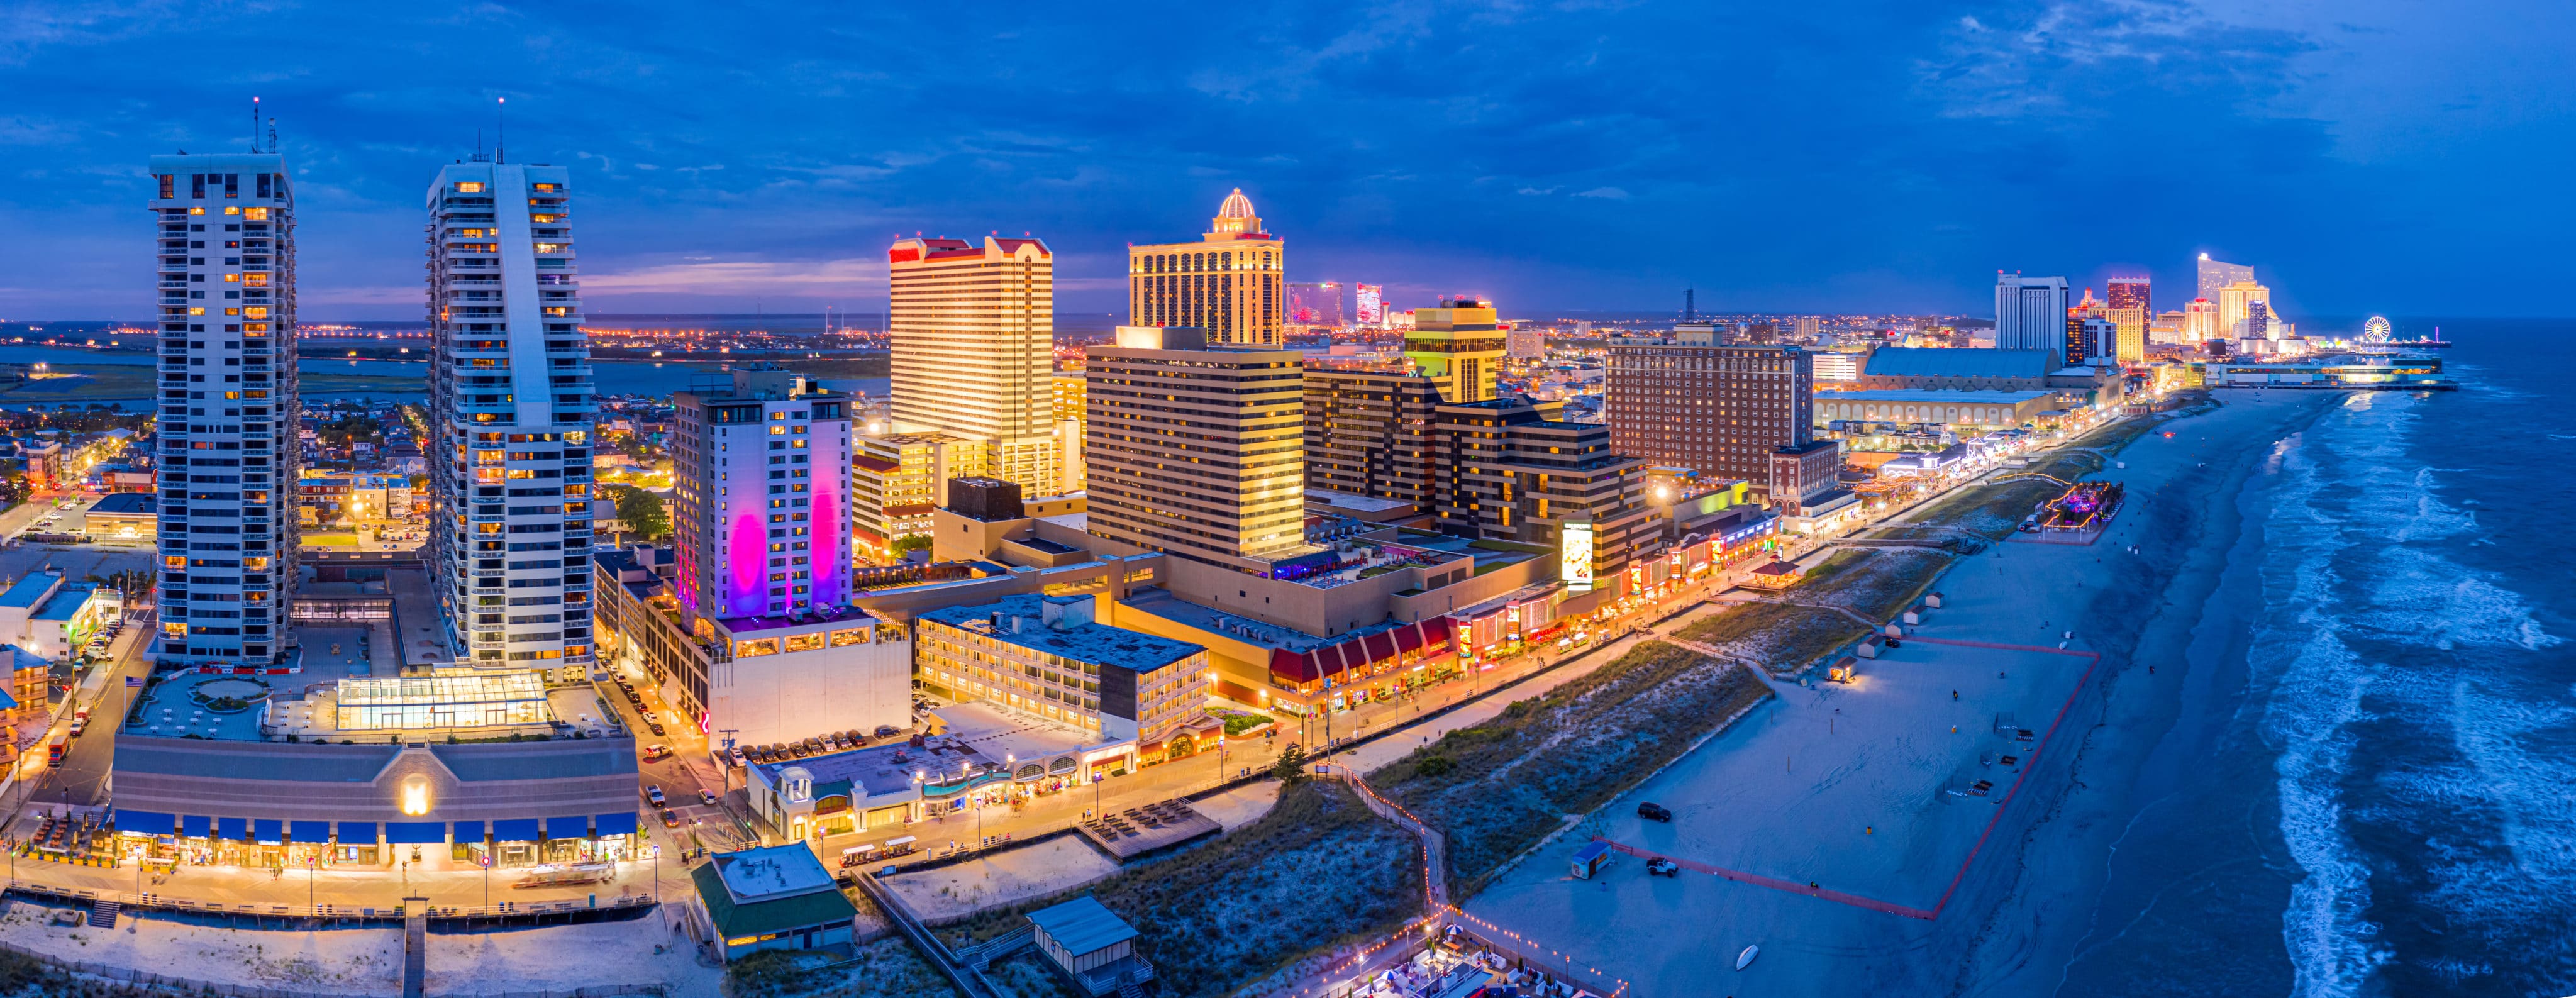 Cannabis Events Just Might Save Atlantic City